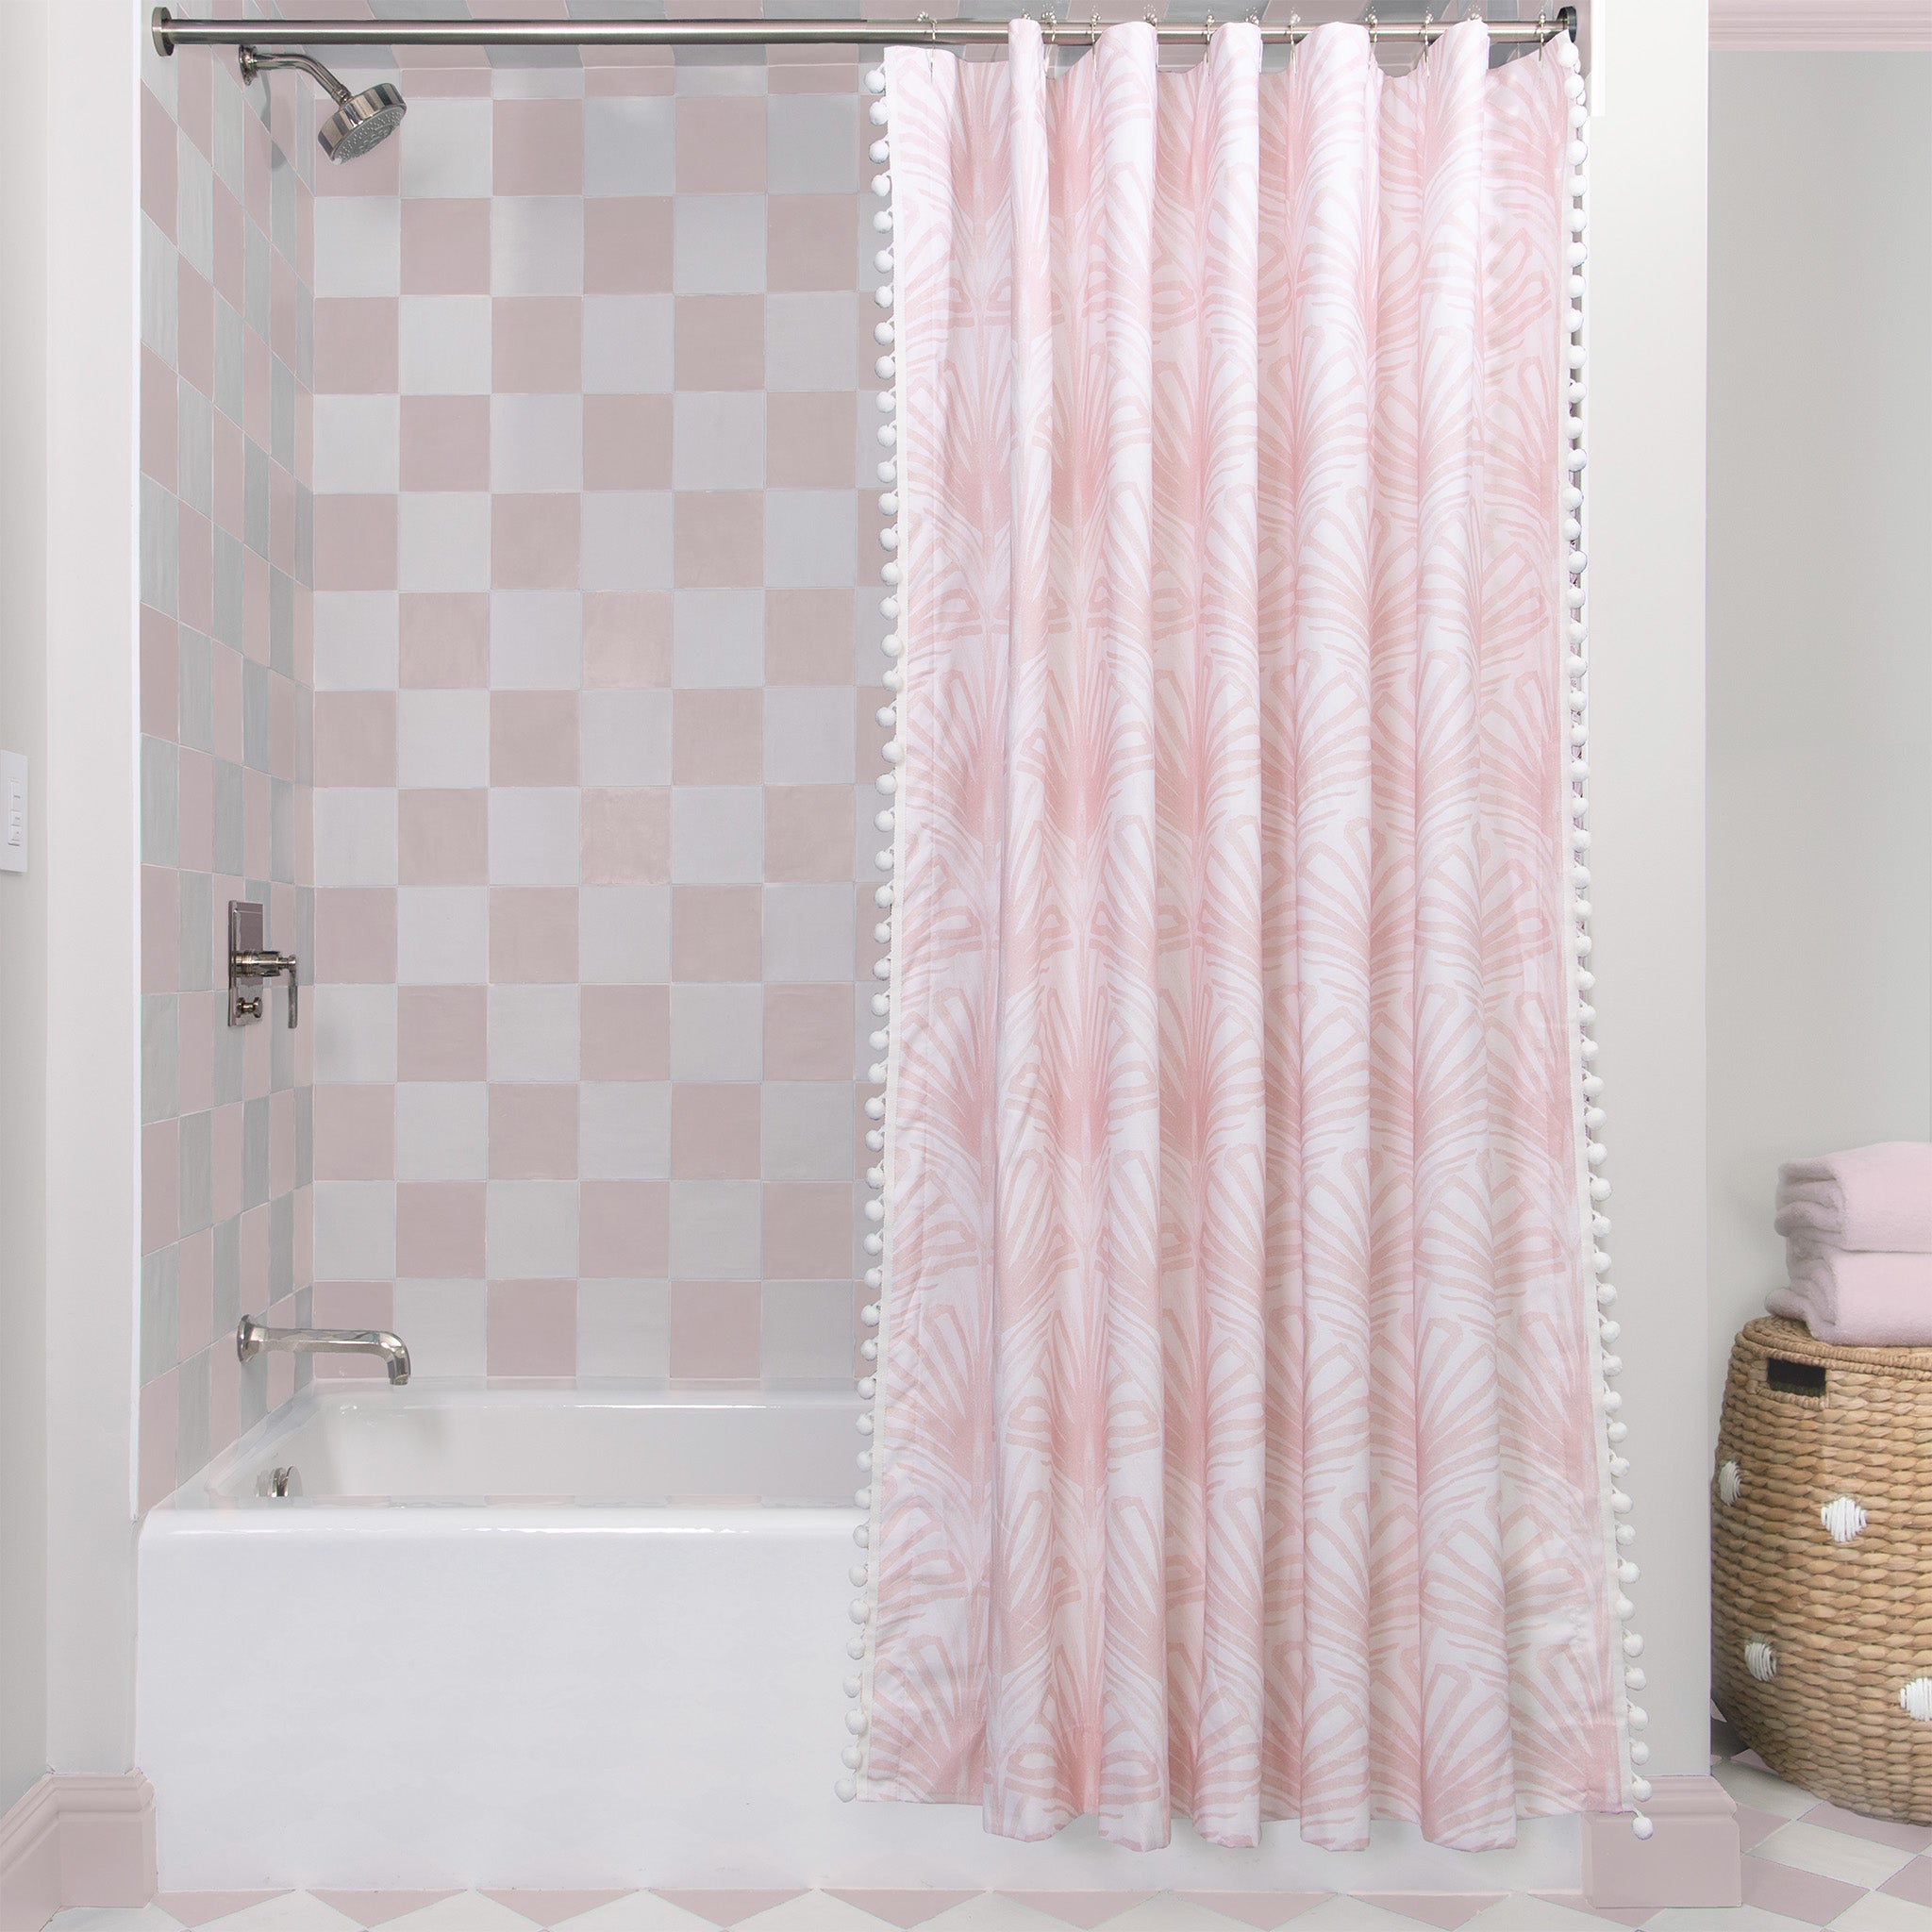 Rose Pink Art Deco Printed shower curtain hanging on rod in front of white tub in bathroom with pink and white tiles